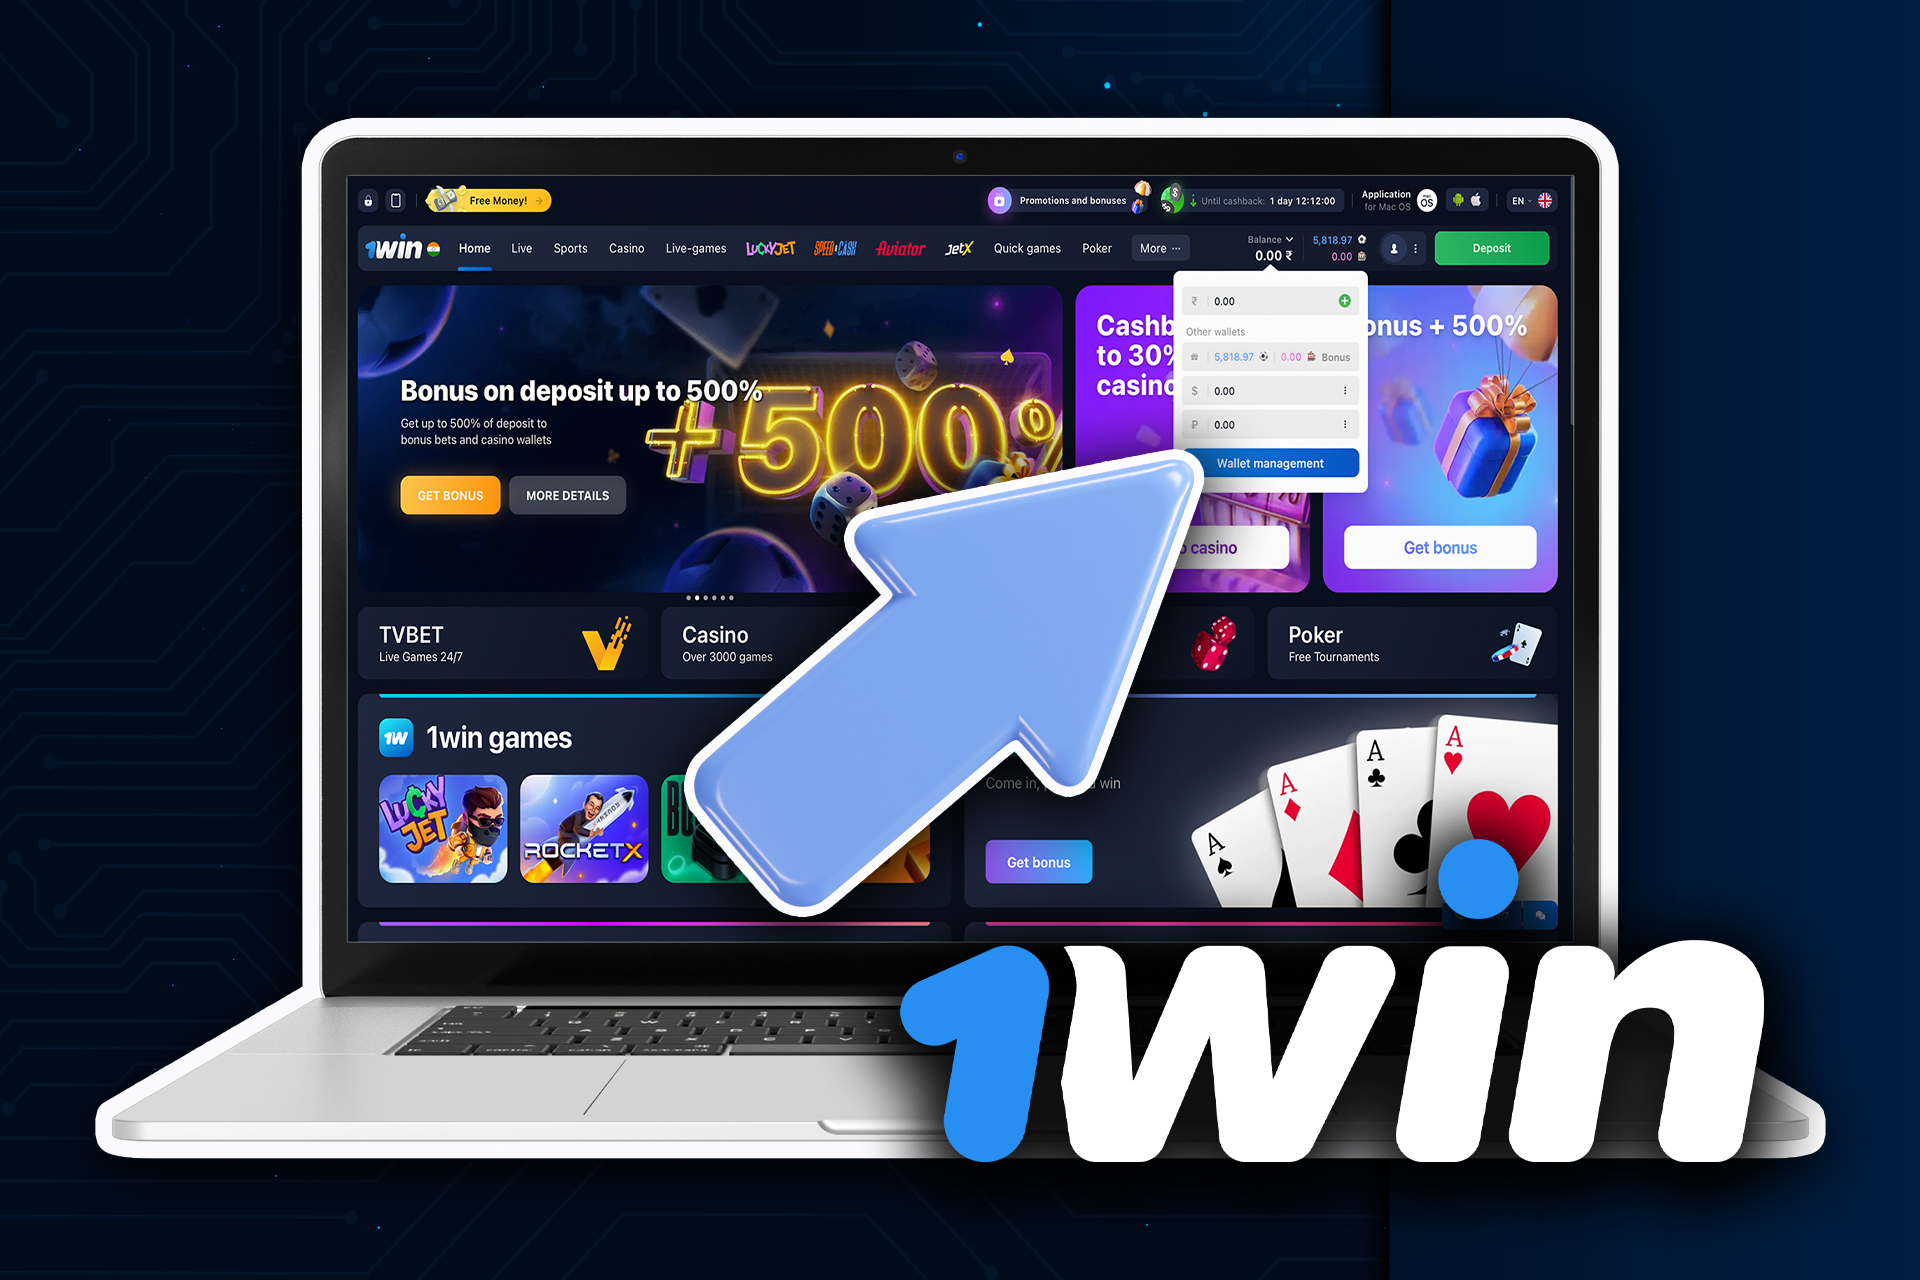 Open the 1win cashier by clicking on the green Deposit button.